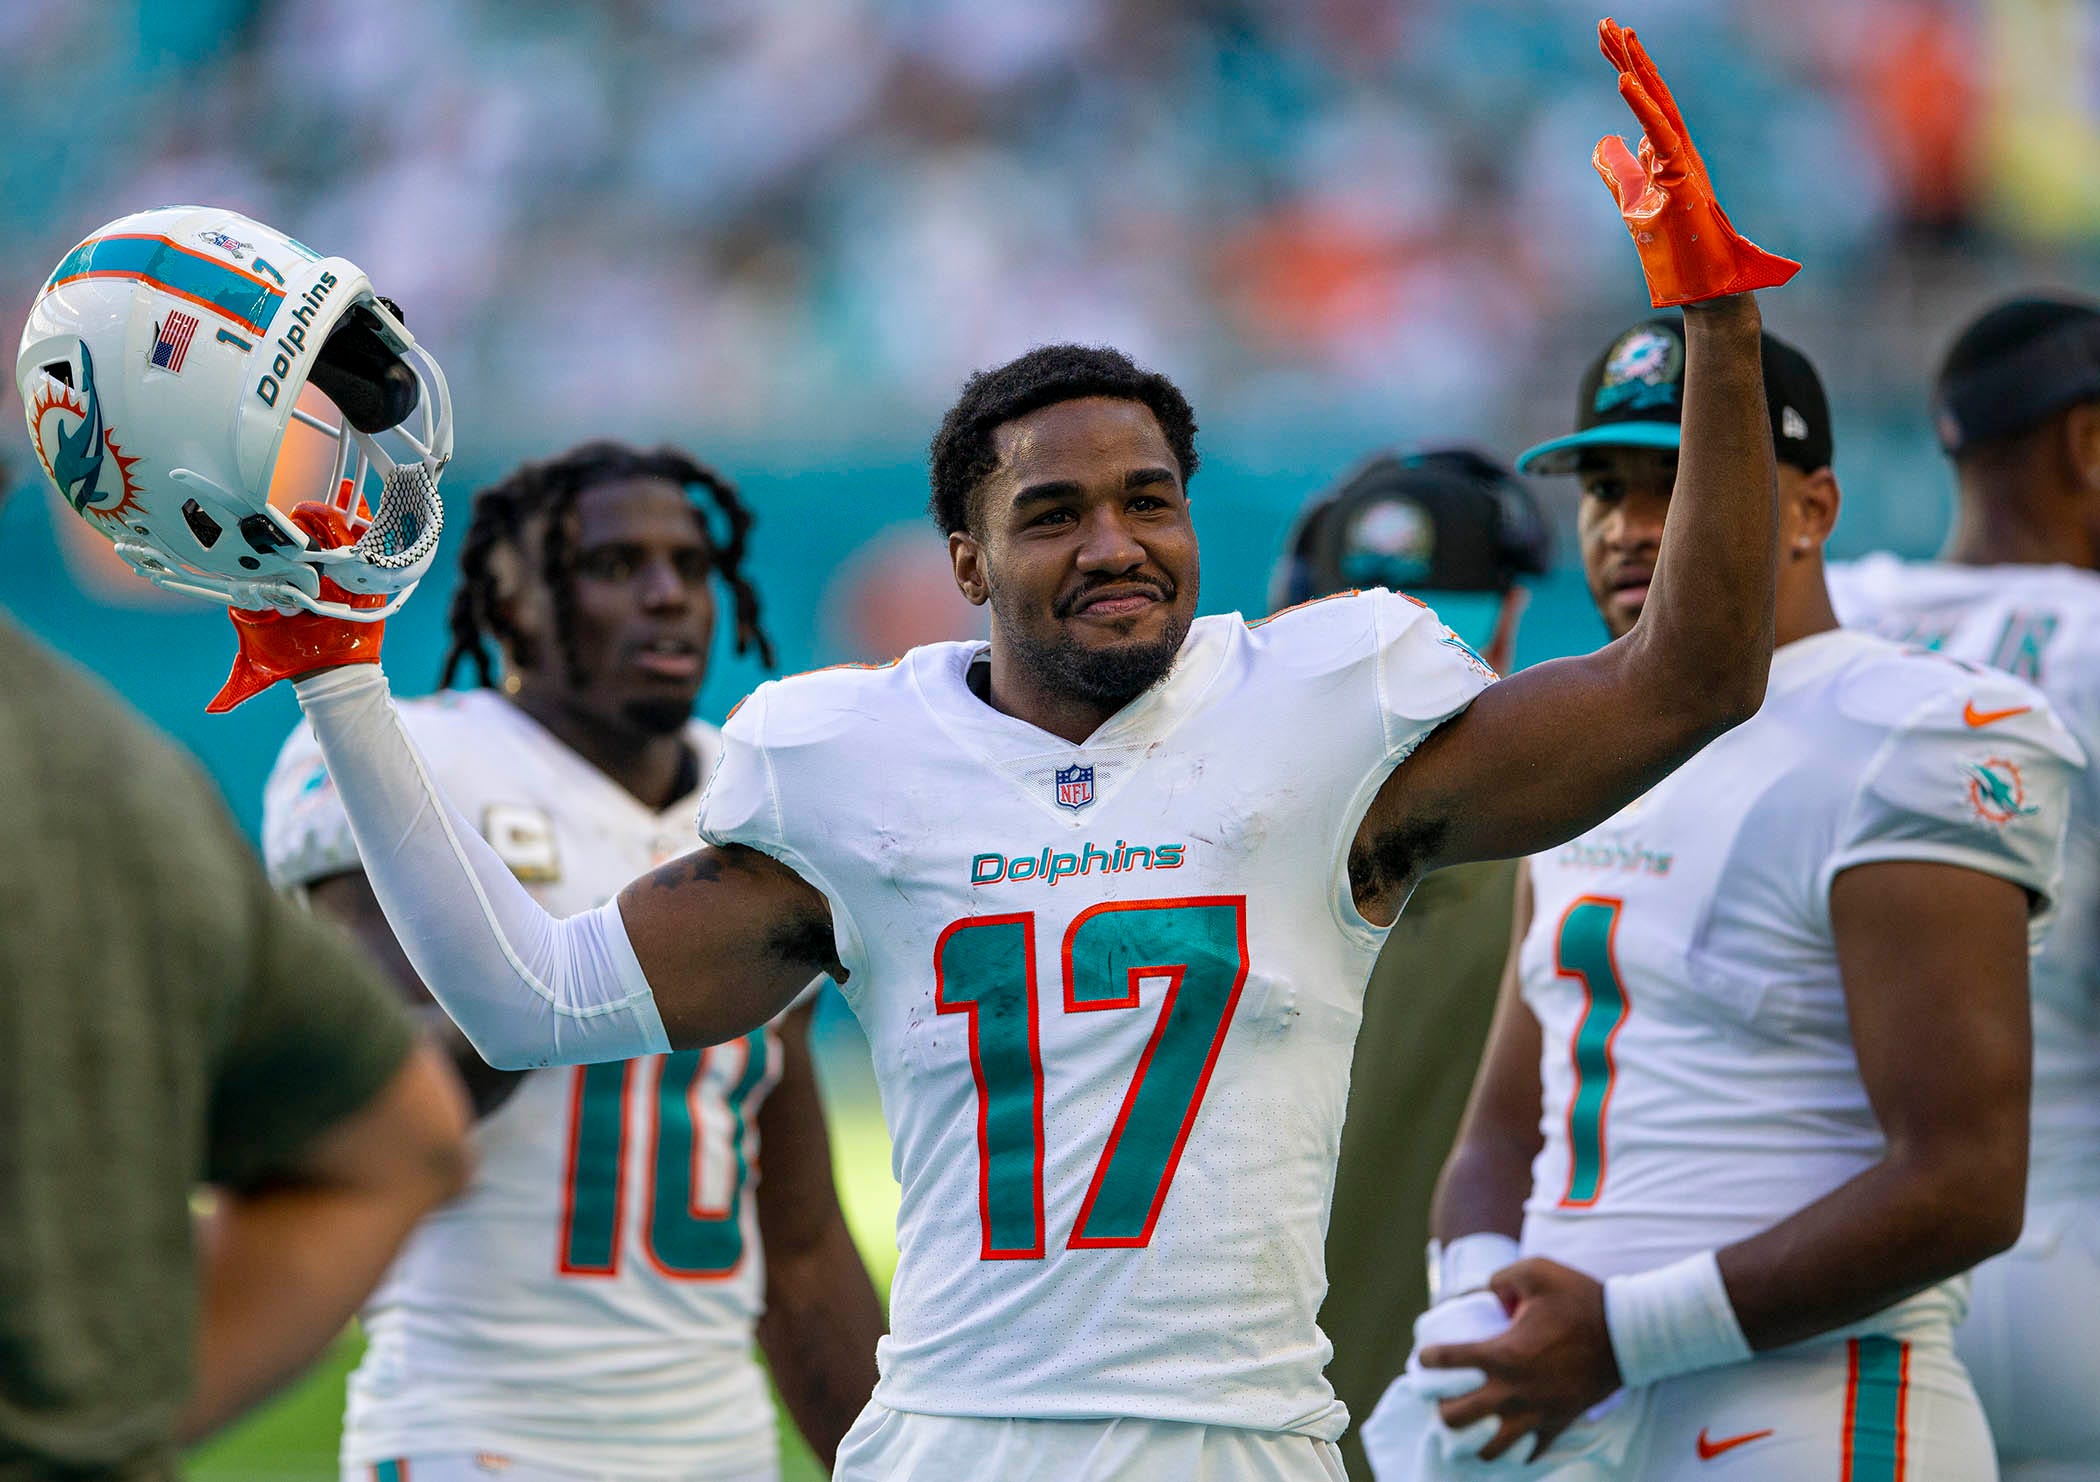 show me the miami dolphins football schedule